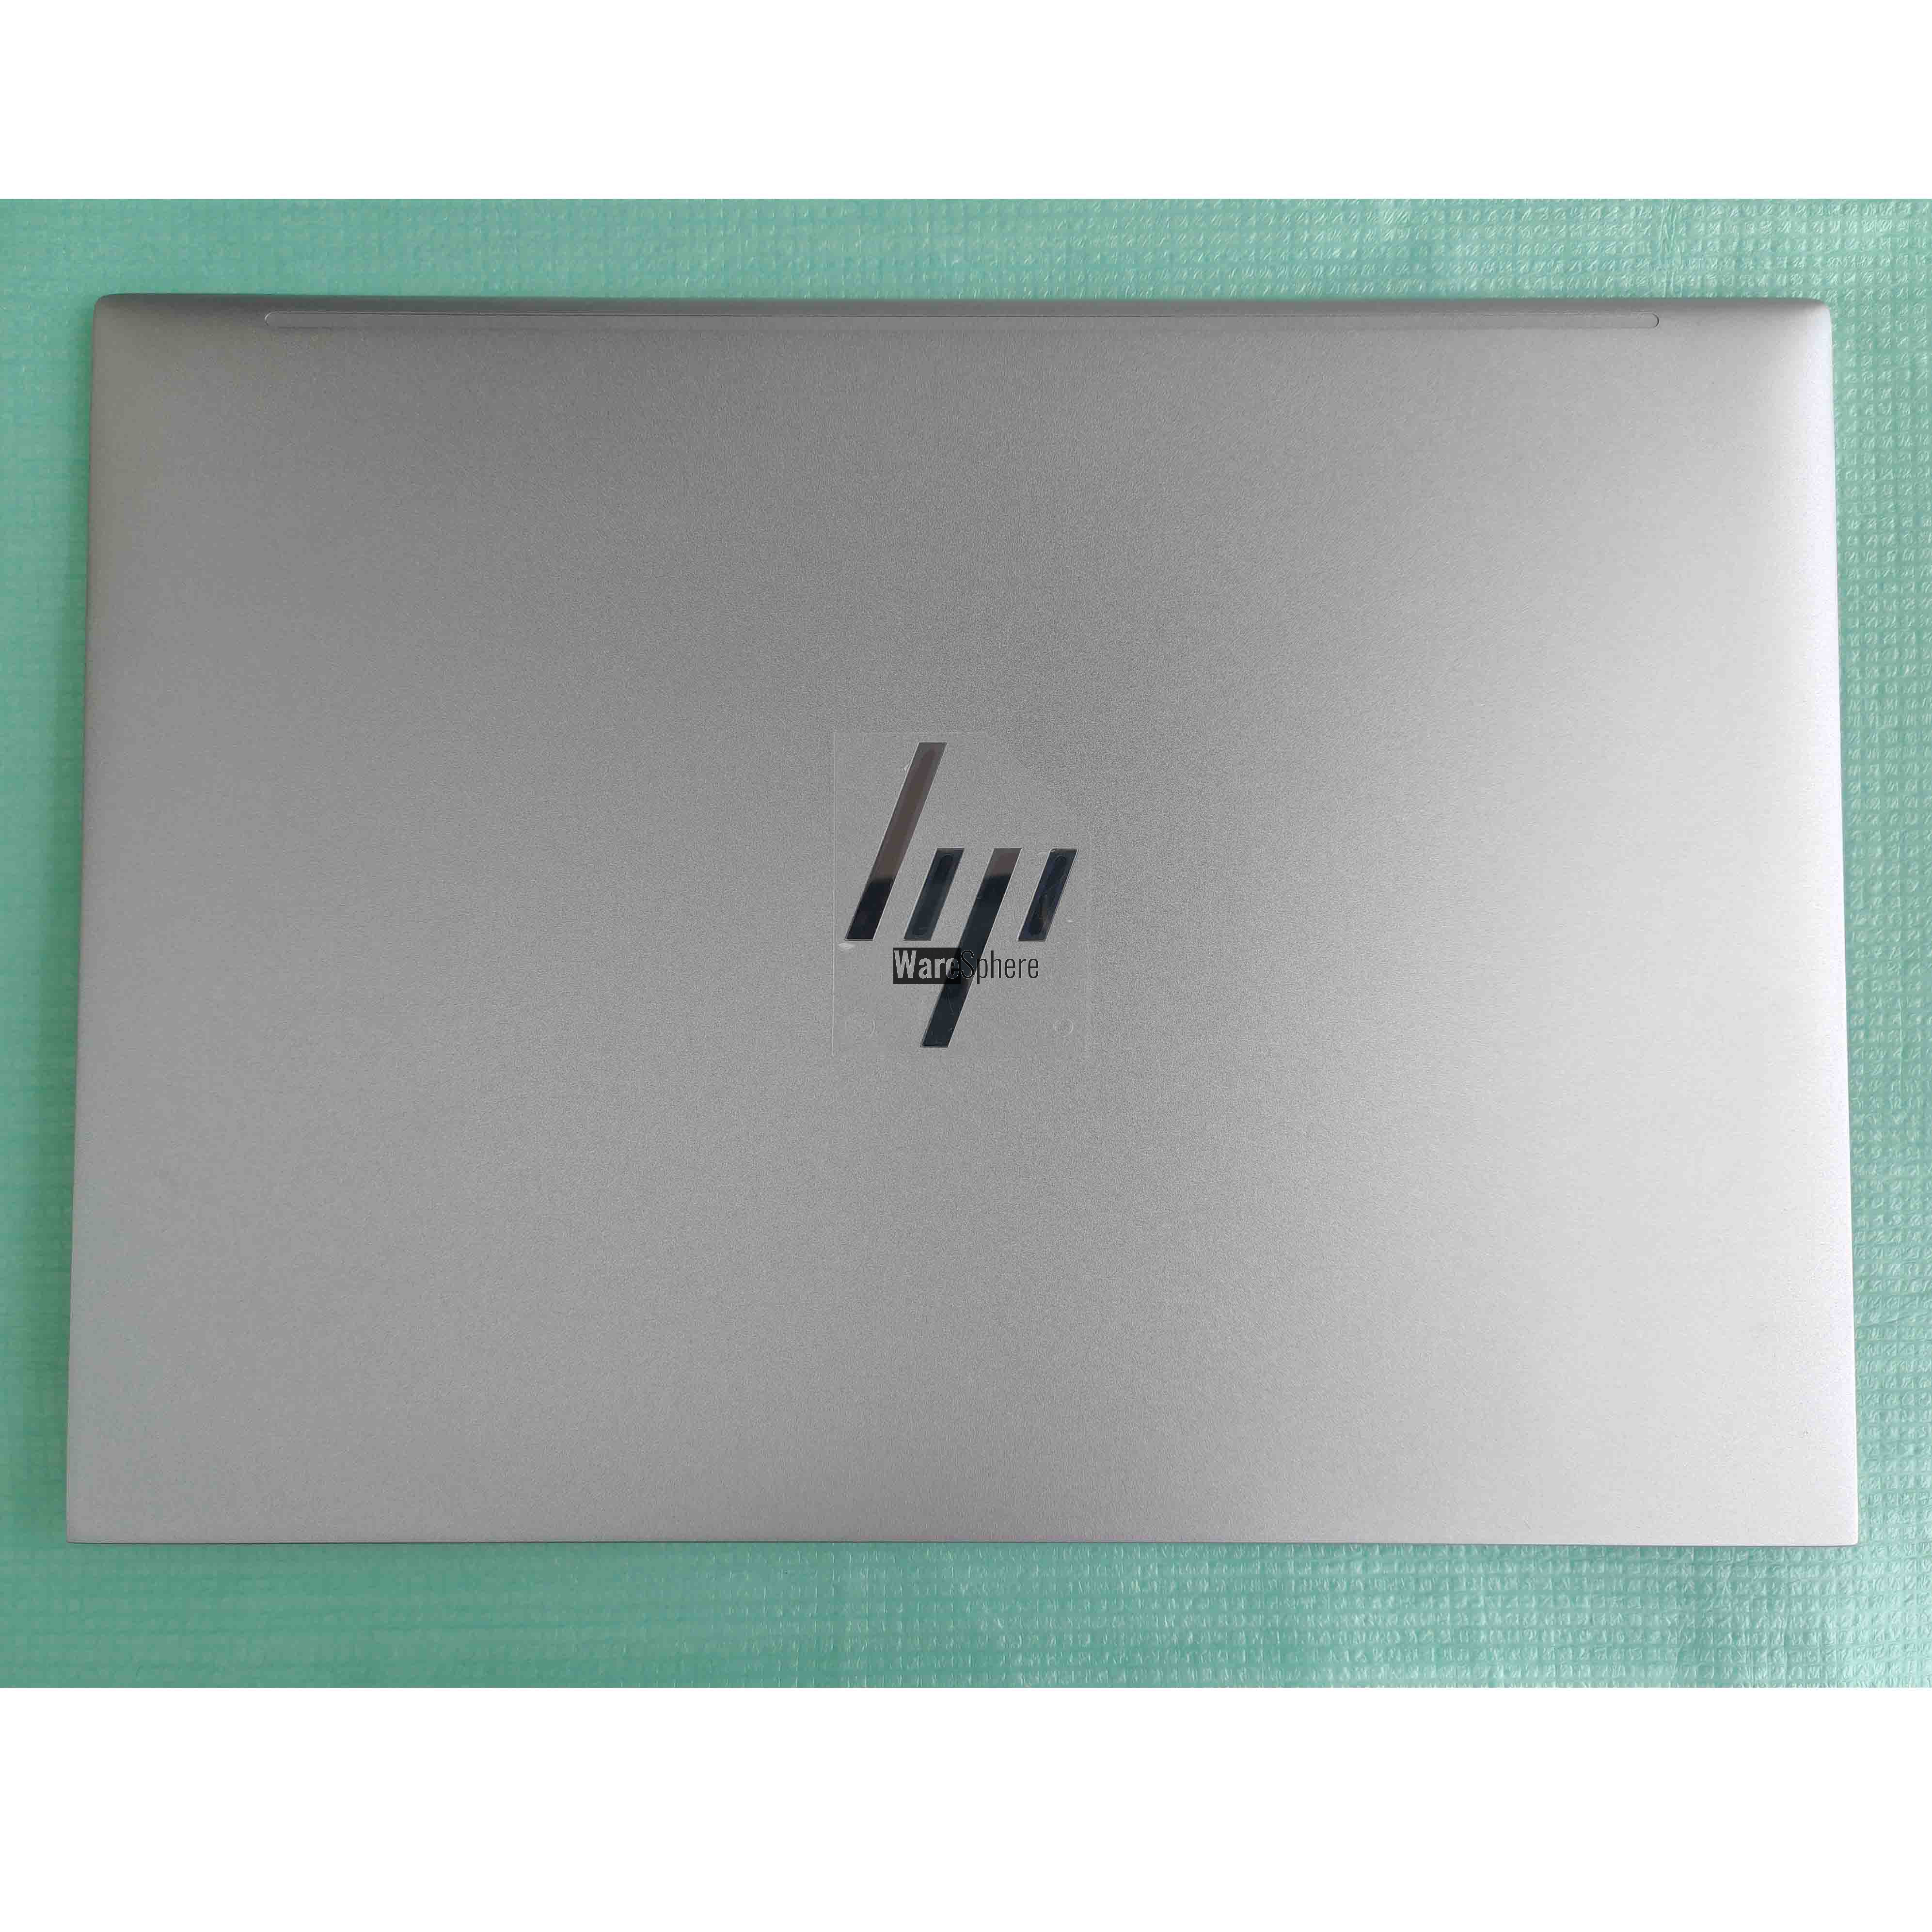 LCD Back Cover for HP EliteBook 840 G10 N49585-001 6070B2172701 Silver 